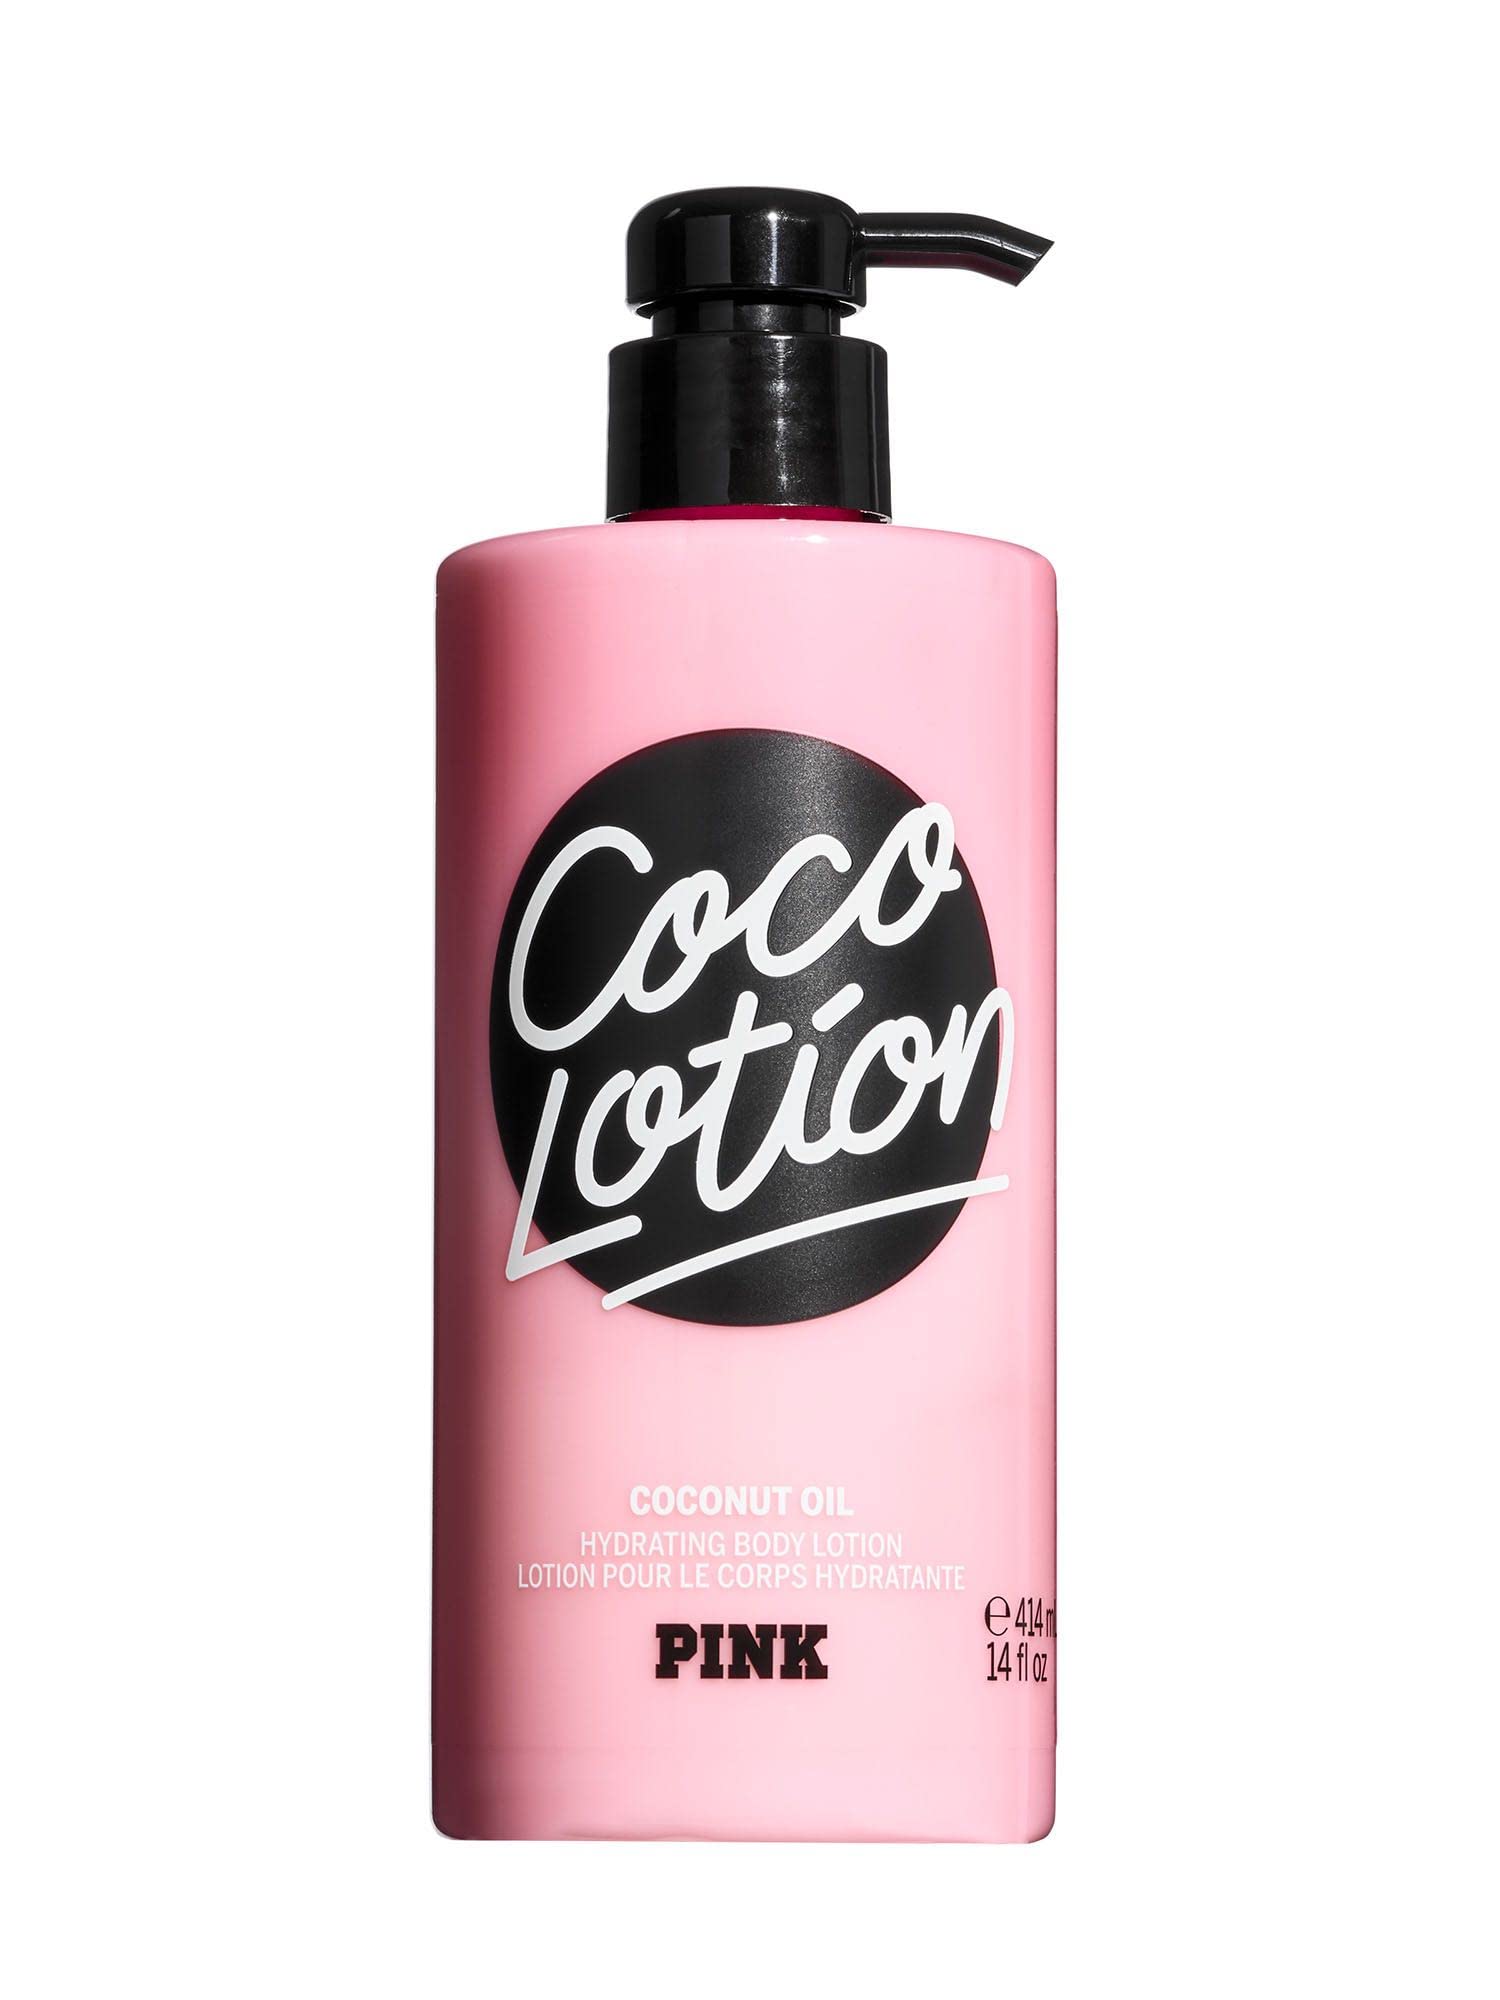 Victoria's secret pink🌸 coco mist body mist with essential oils & coco oil  conditioning body oil #victoriassecret #bodymistvictoriasecret